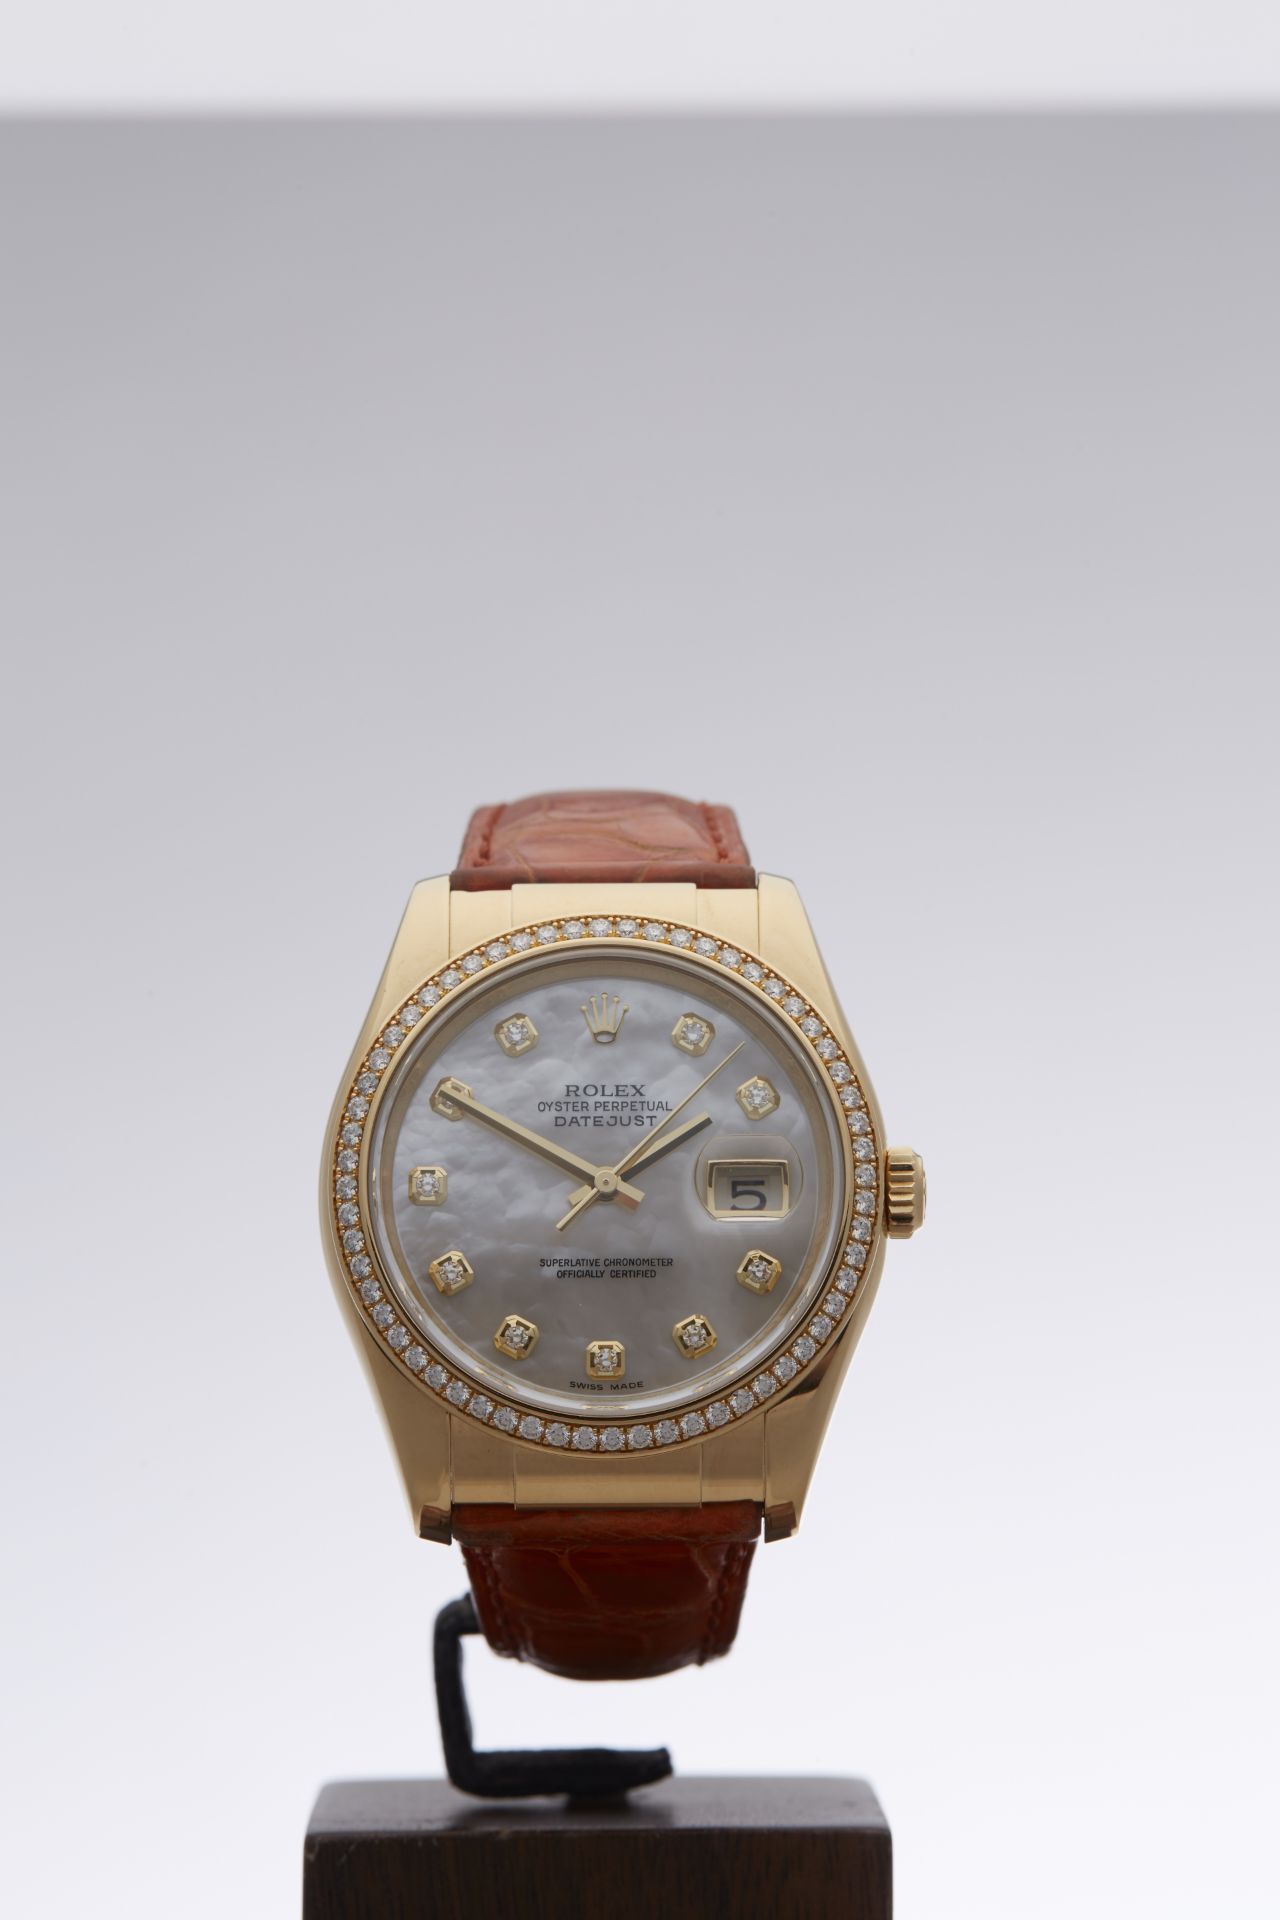 Rolex Datejust 36mm 18k Yellow Gold 116188 - Image 5 of 17